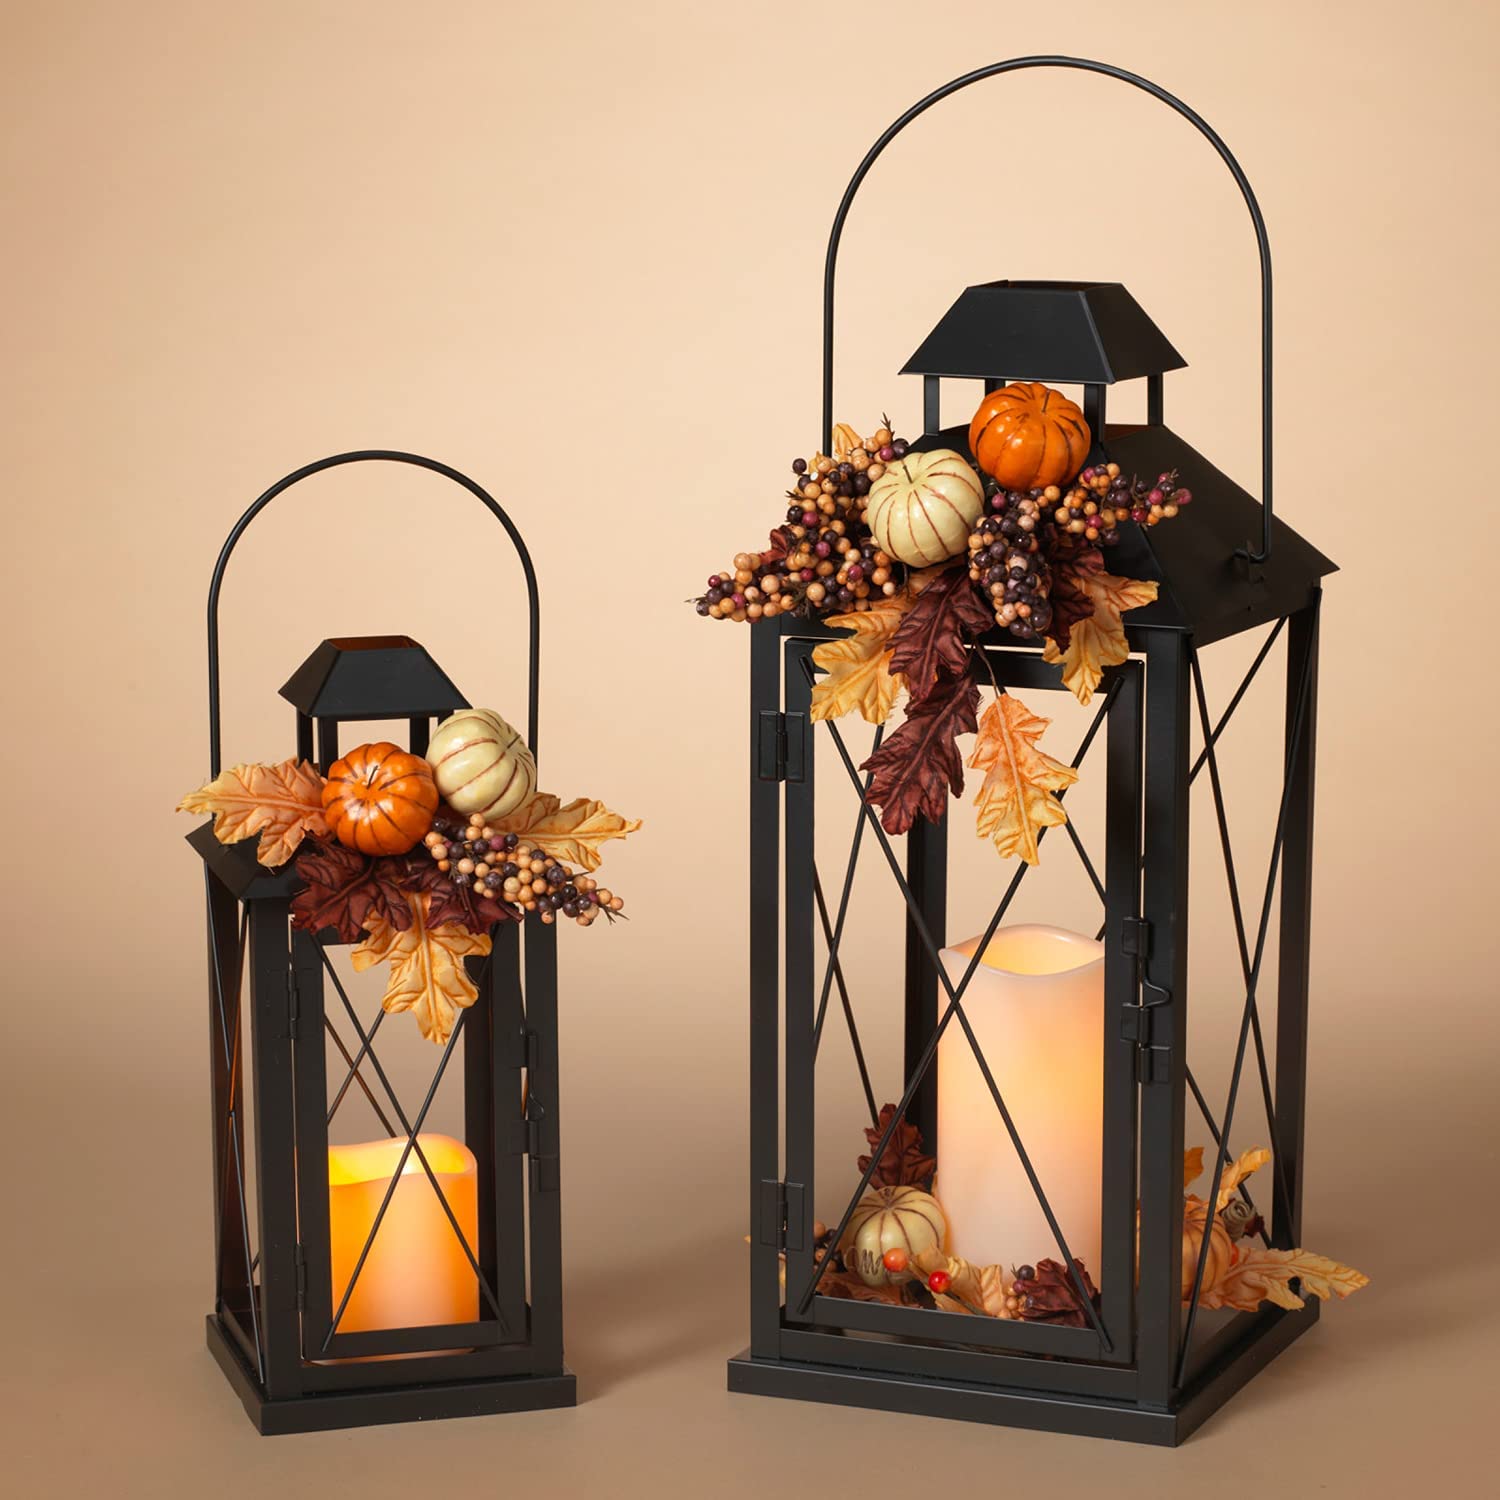 20-Inch Set of 2 Black Metal Decorative Lanterns - LED Battery Timer Pillar  Candles with Fall Accents - Hanging or Tabletop Thanksgiving Decorations 